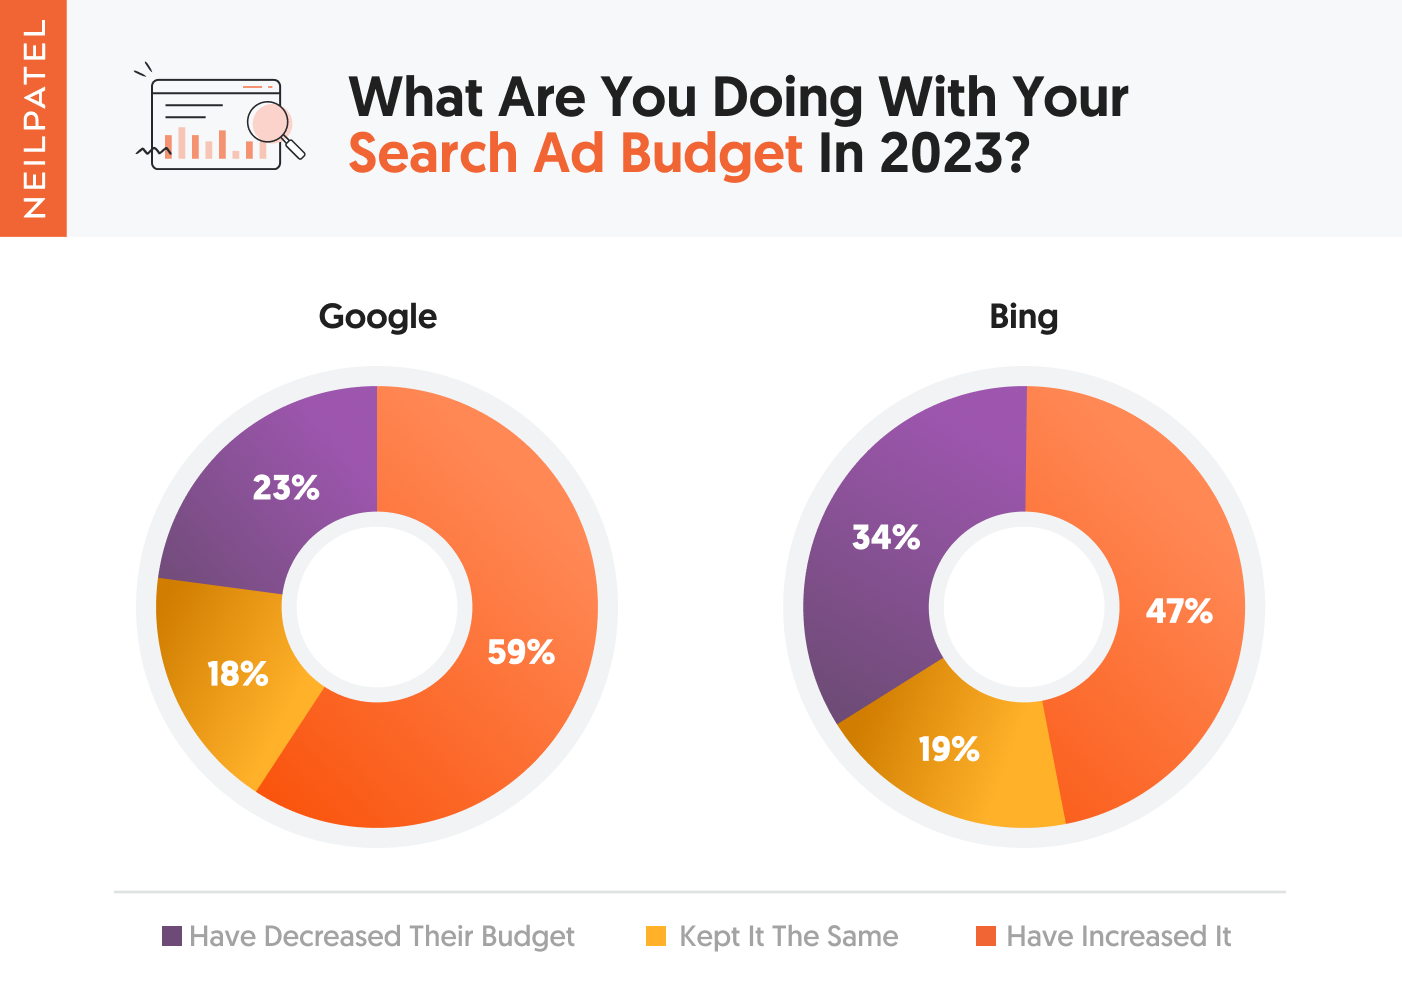 What are you doing with your search ad budget in 2023